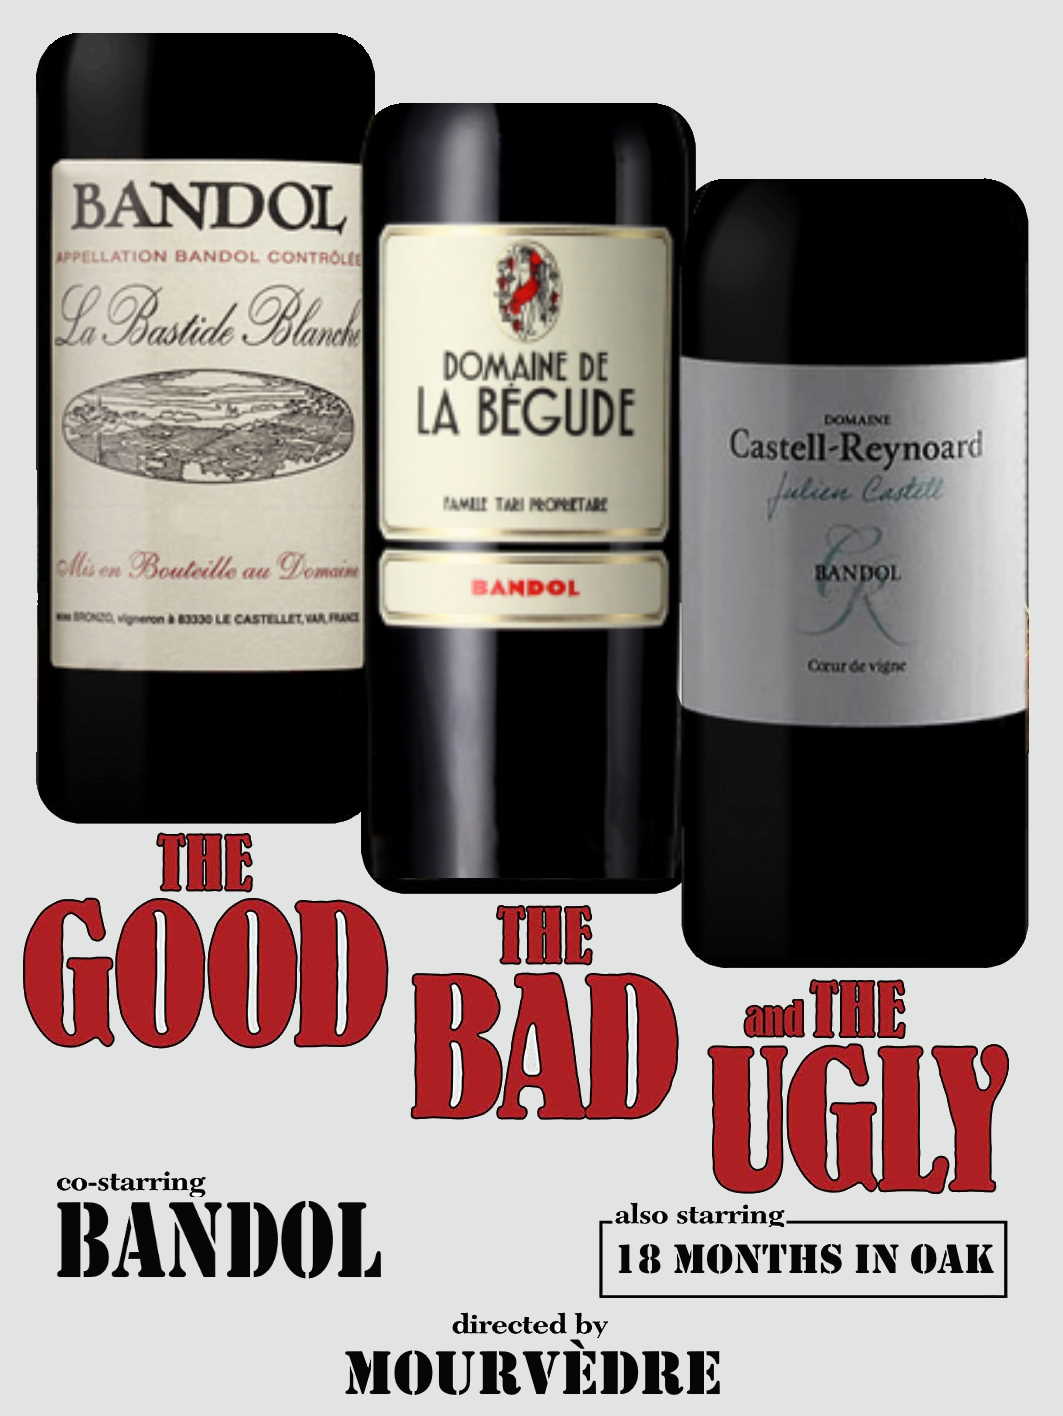 Bandol version of The Good, the Bad and the Ugly film poster